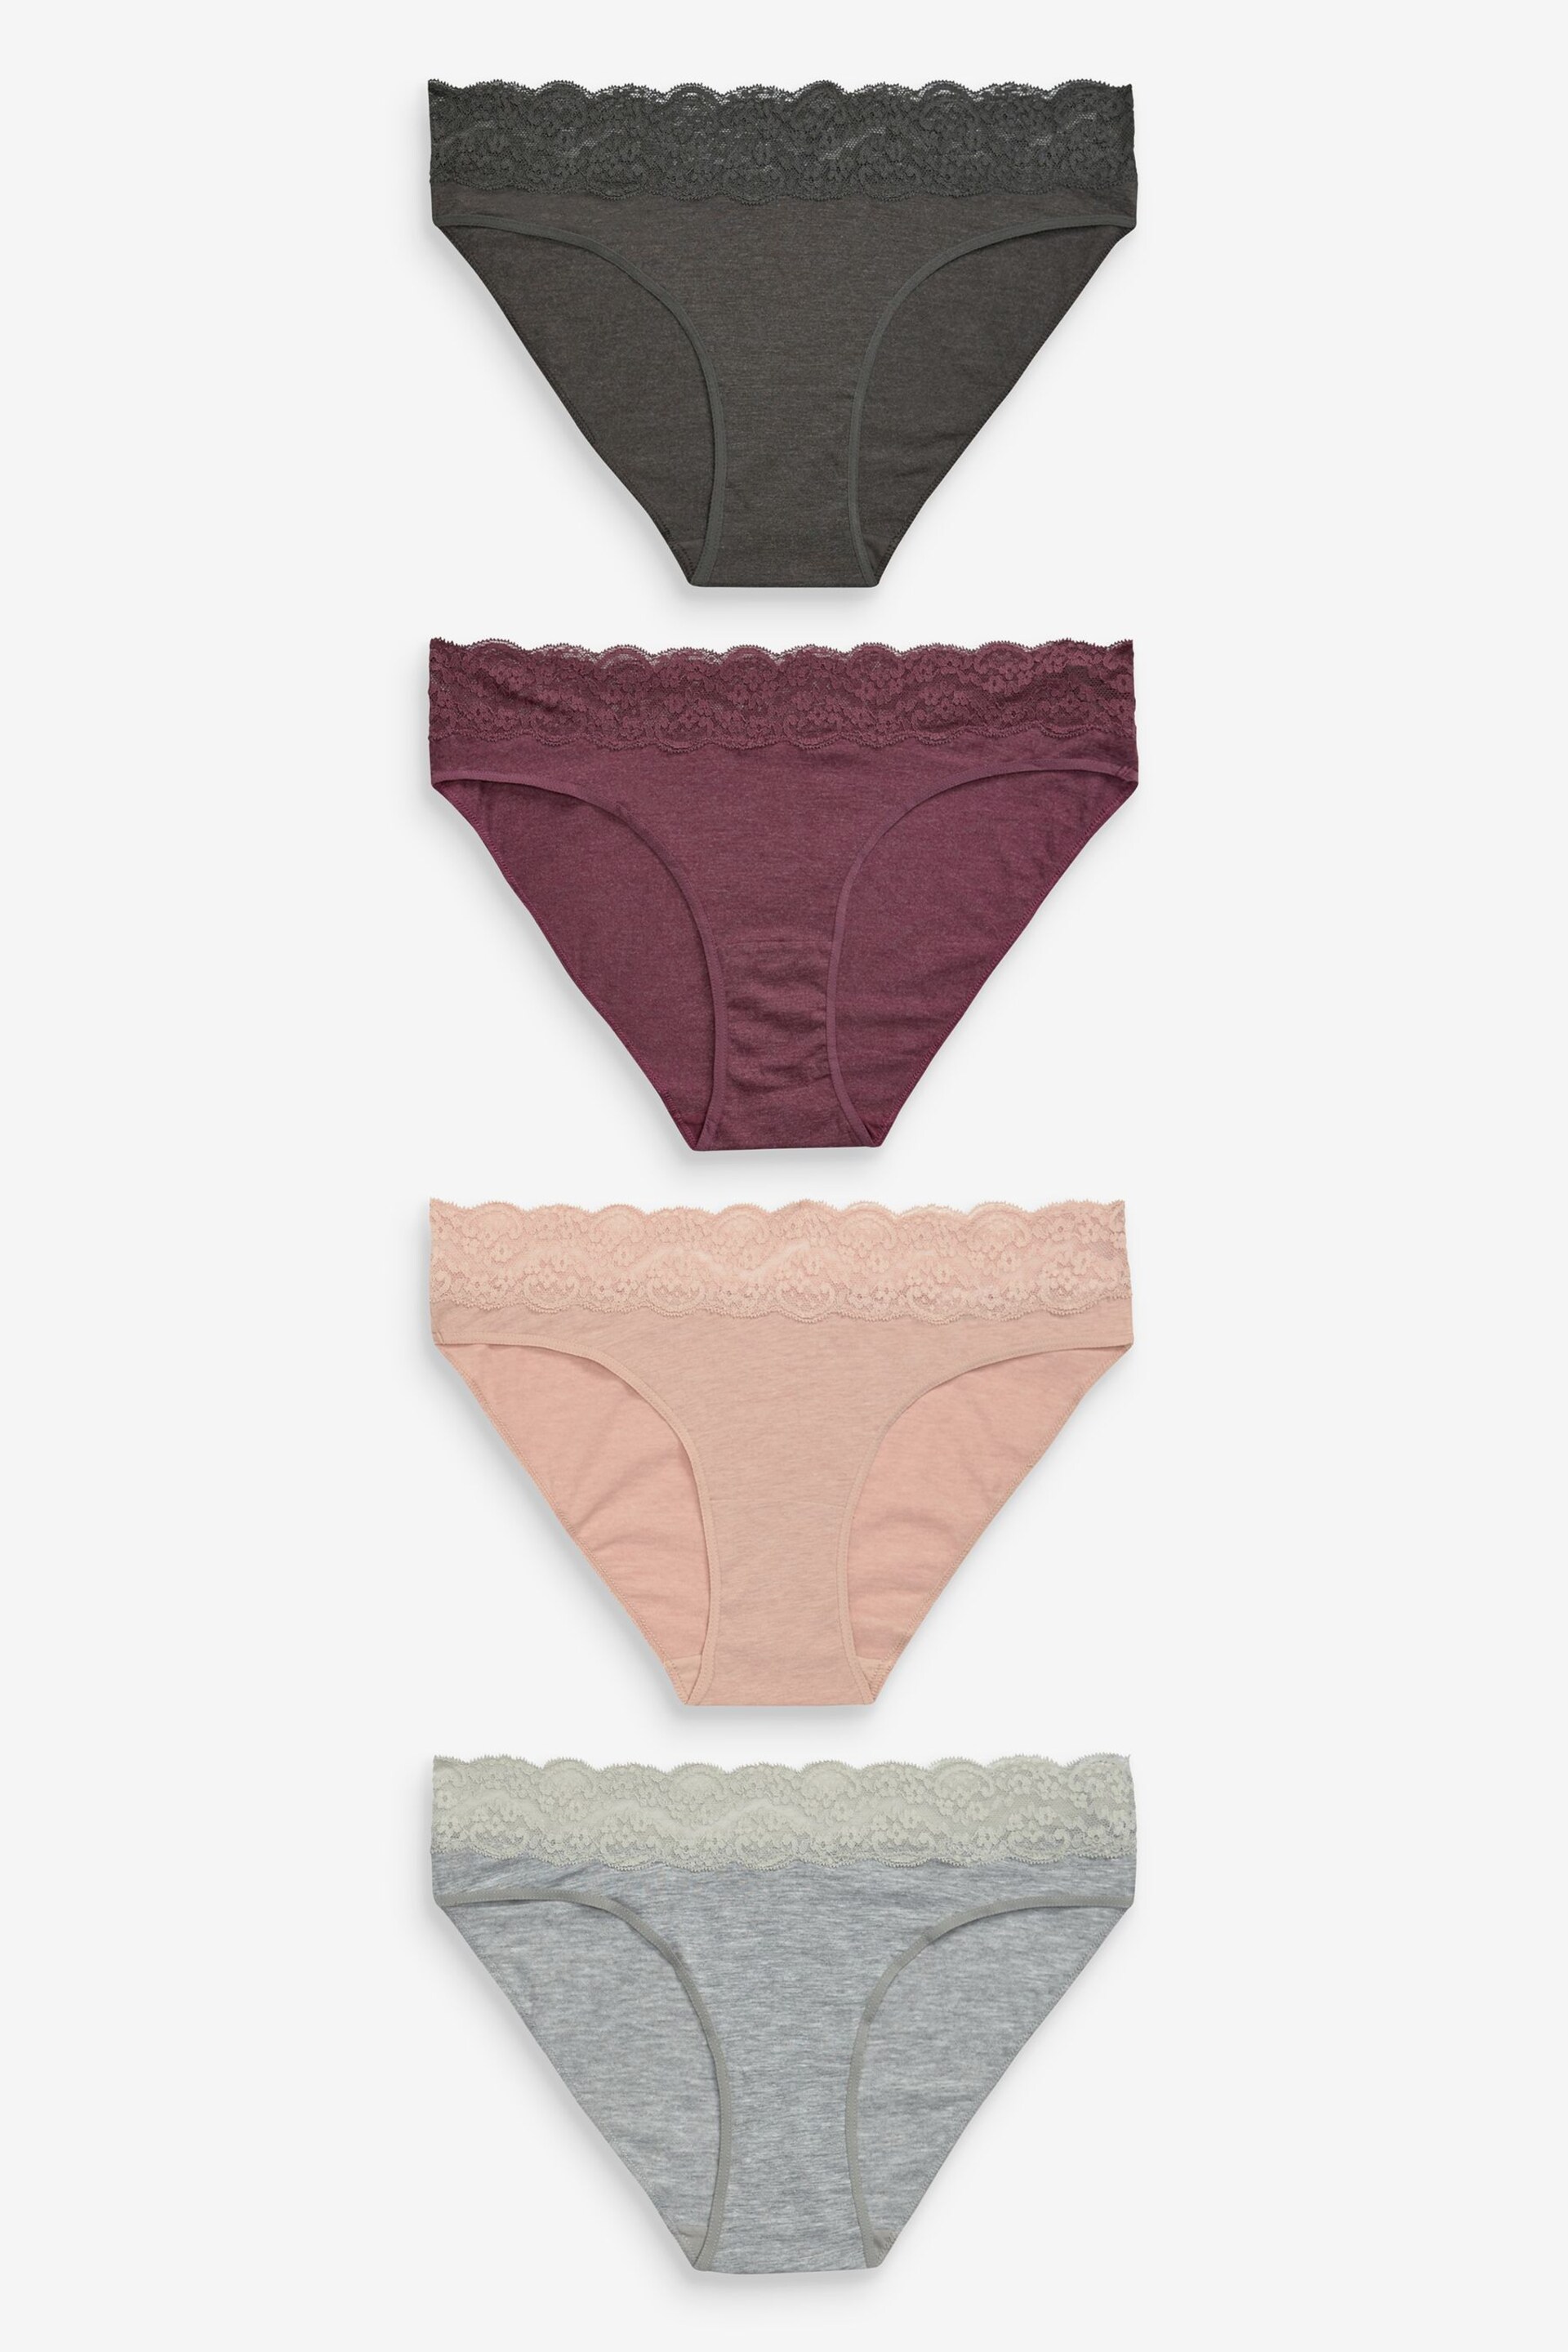 Grey Marl/Pink/Plum High Leg Cotton and Lace Knickers 4 Pack - Image 1 of 13